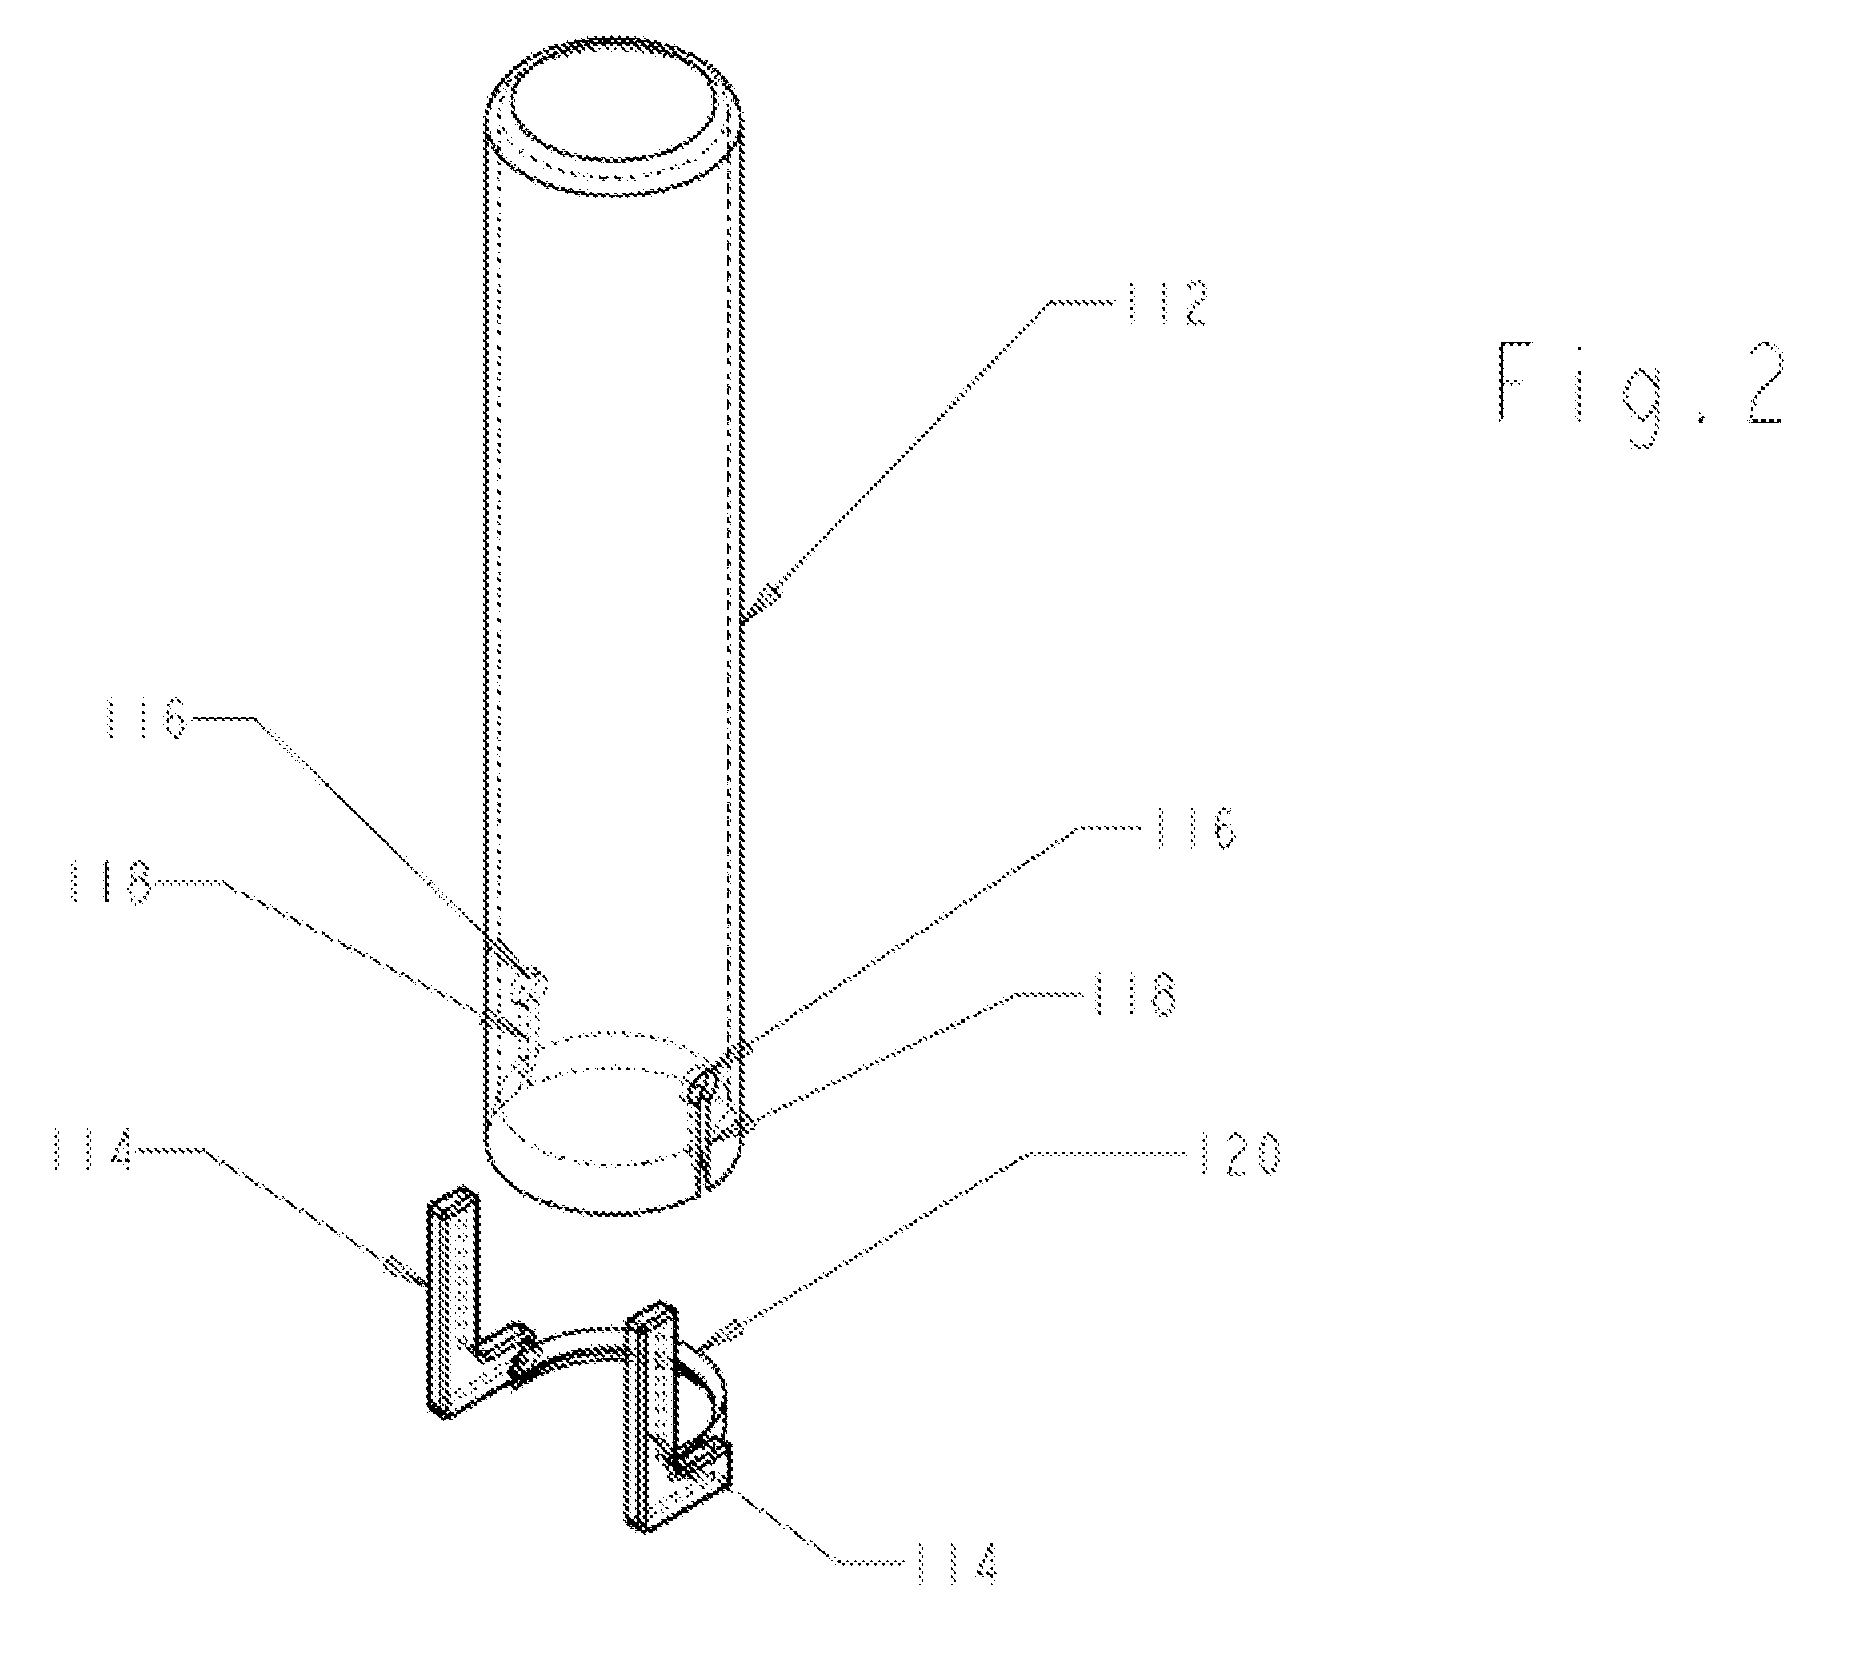 Apparatus for punch biopsy